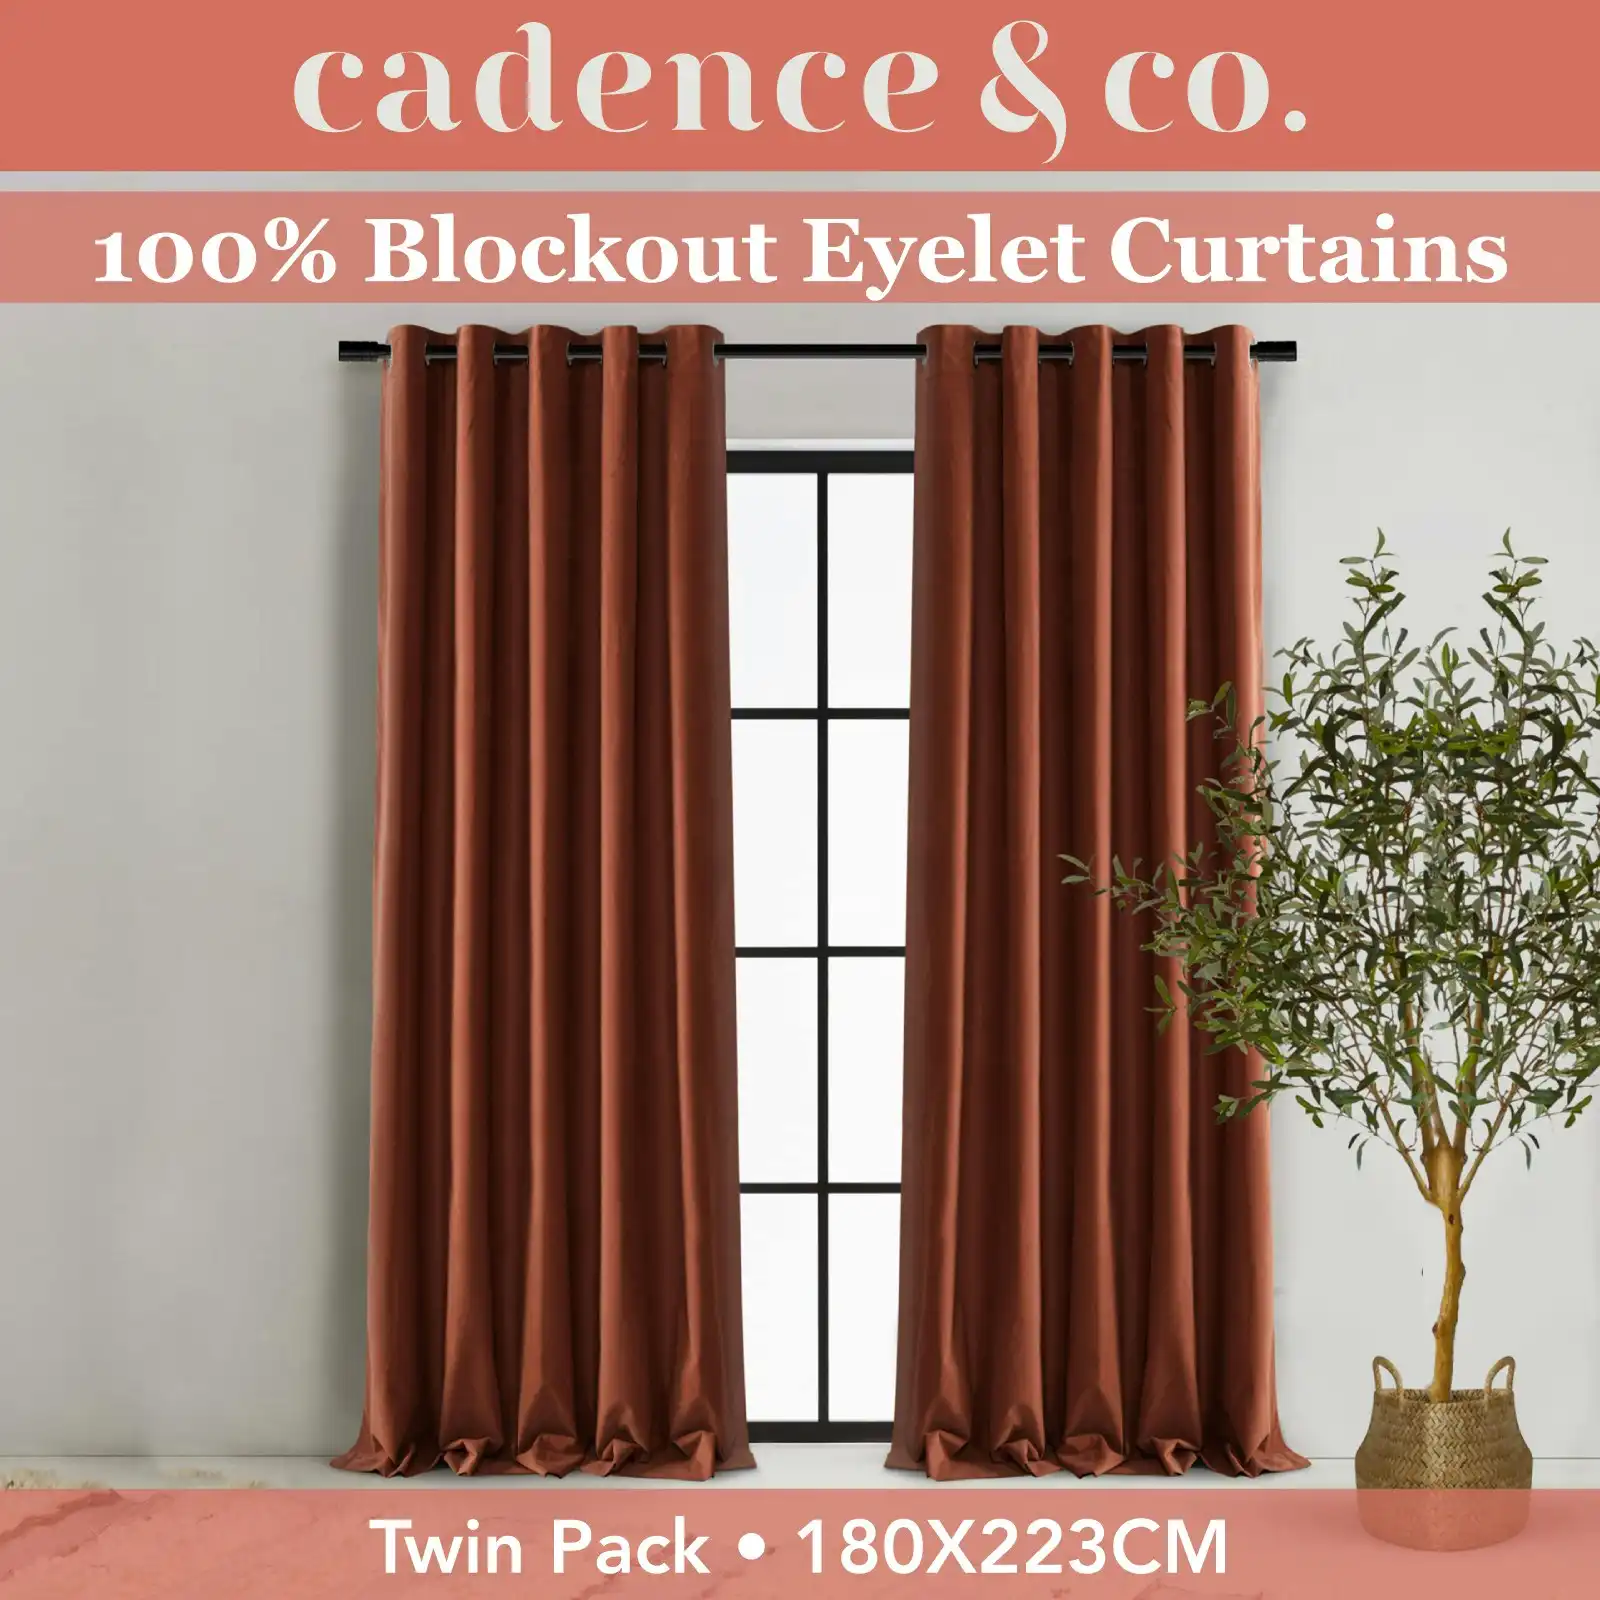 Cadence & Co. Byron Matte Velvet 100% Blockout Eyelet Curtains Twin Pack Rust 180x223cm